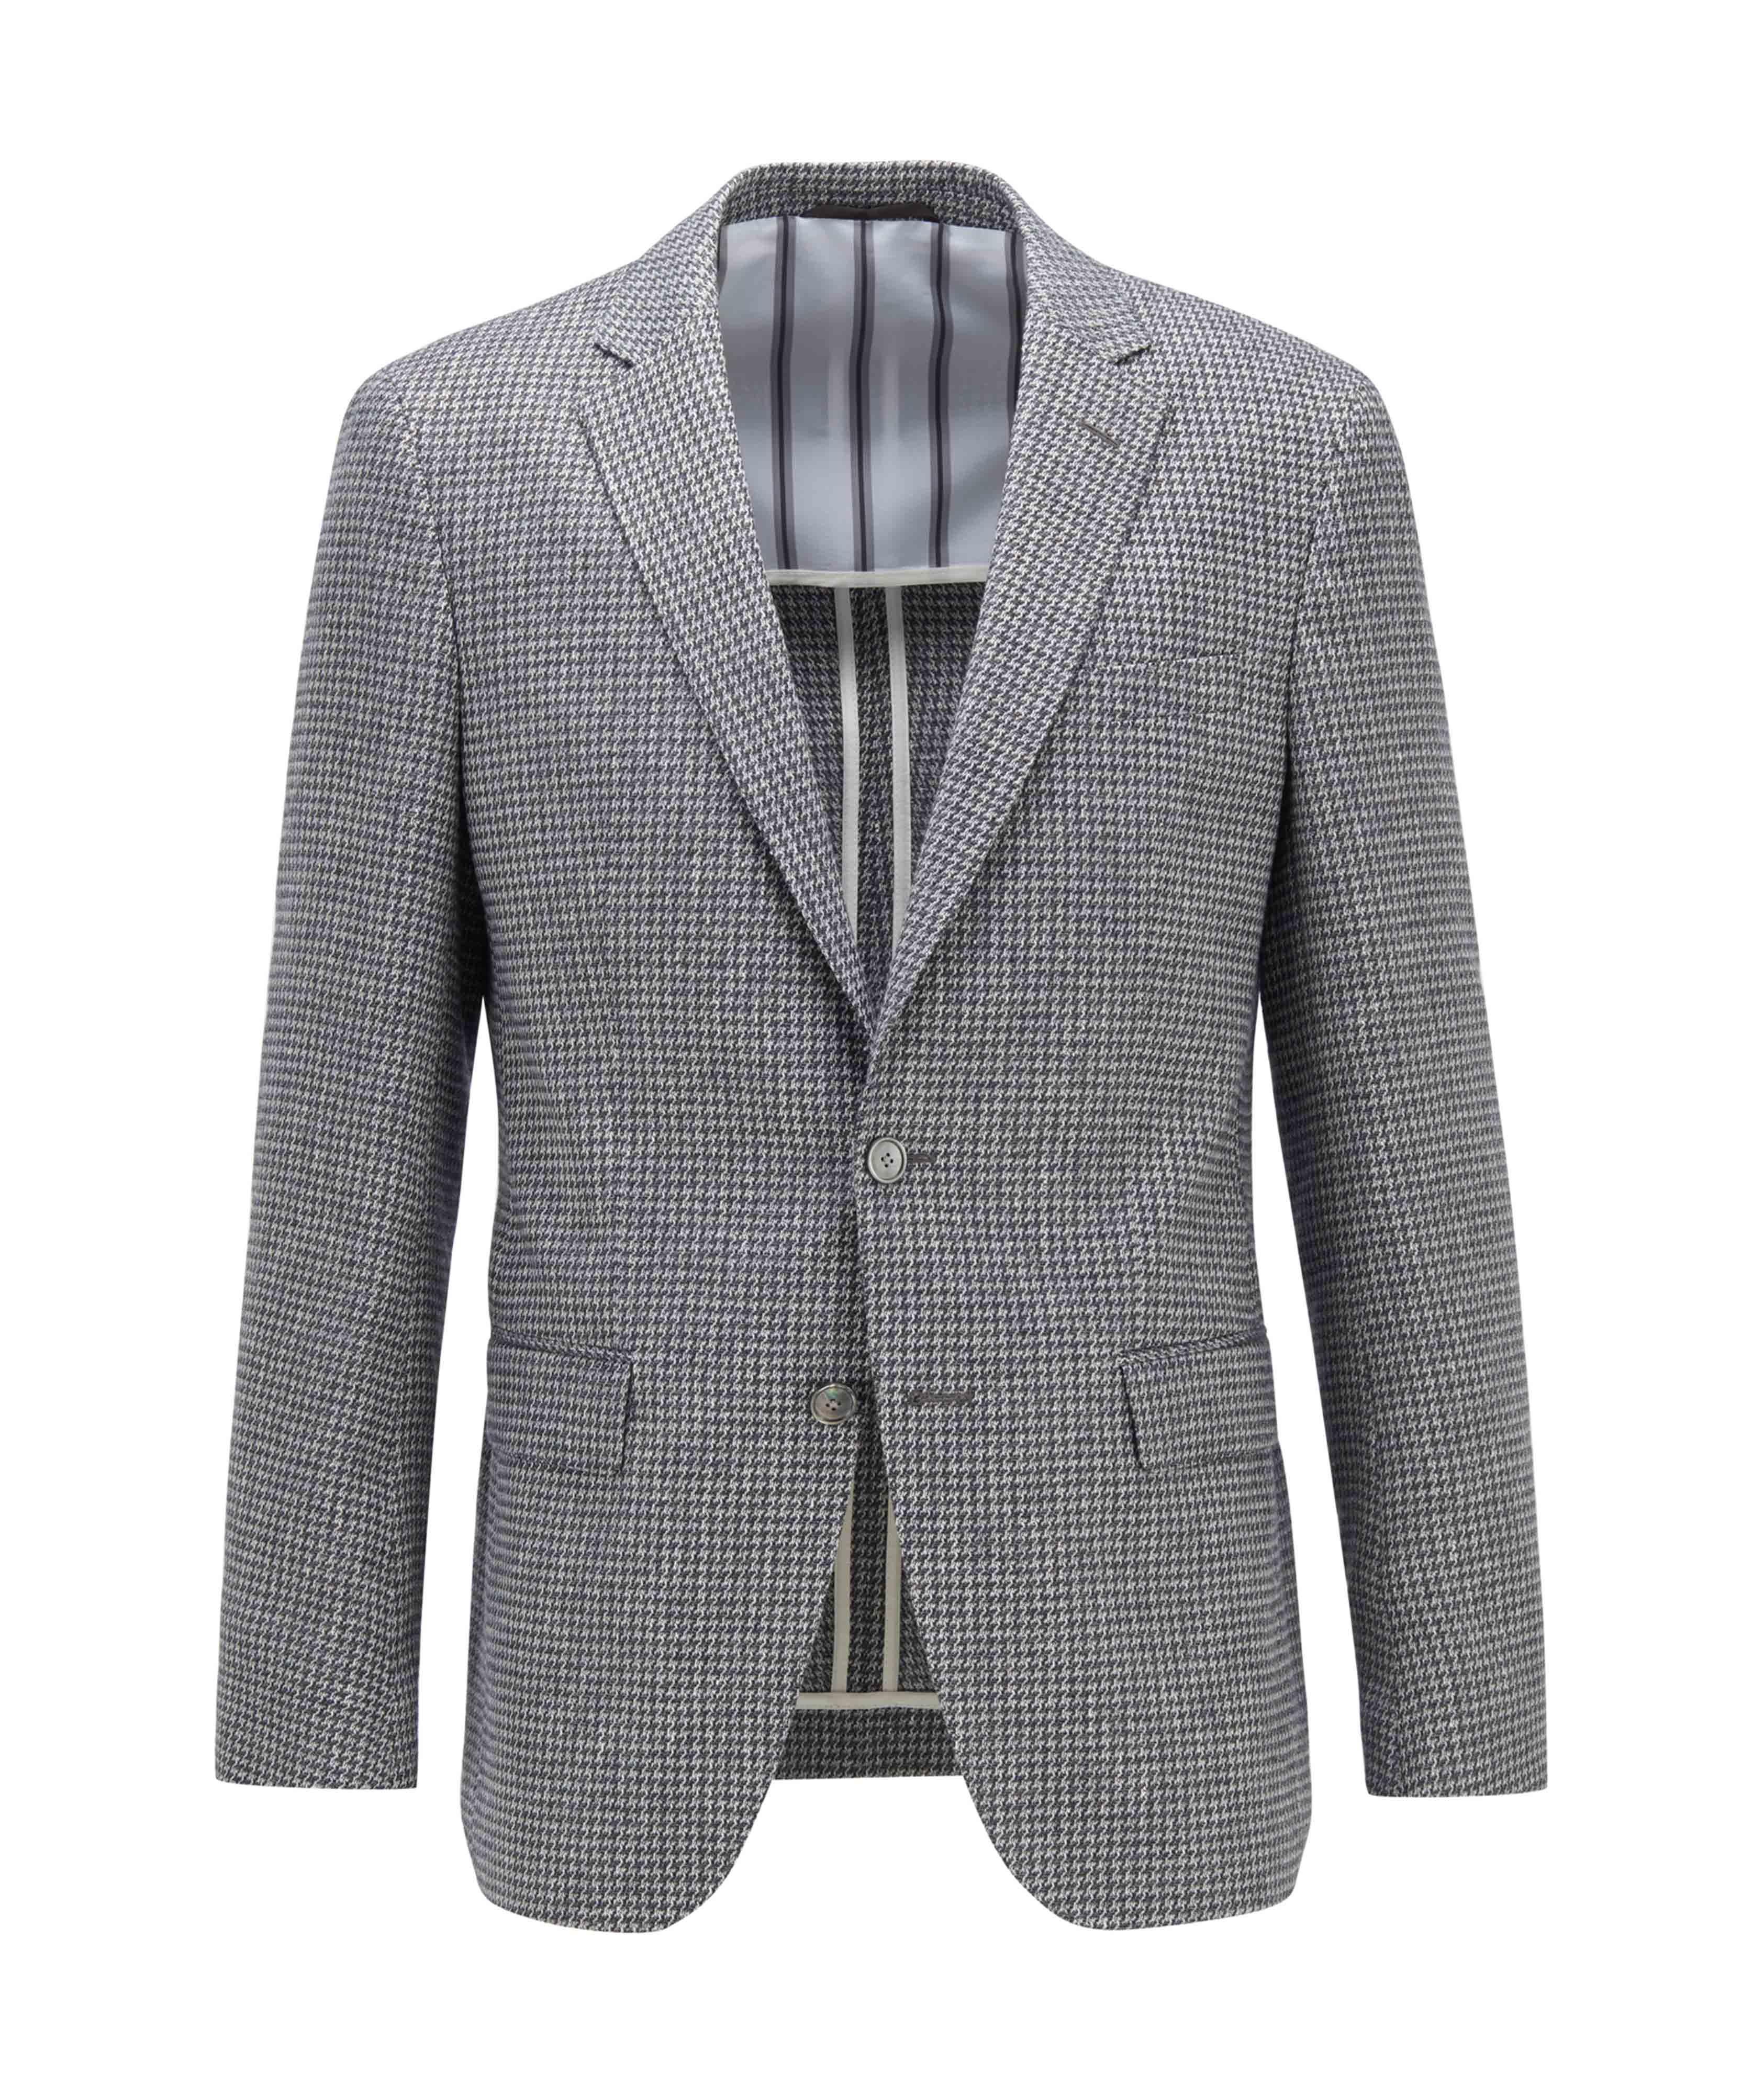 Harlay2 Houndstooth Linen-Wool Sports Jacket image 0